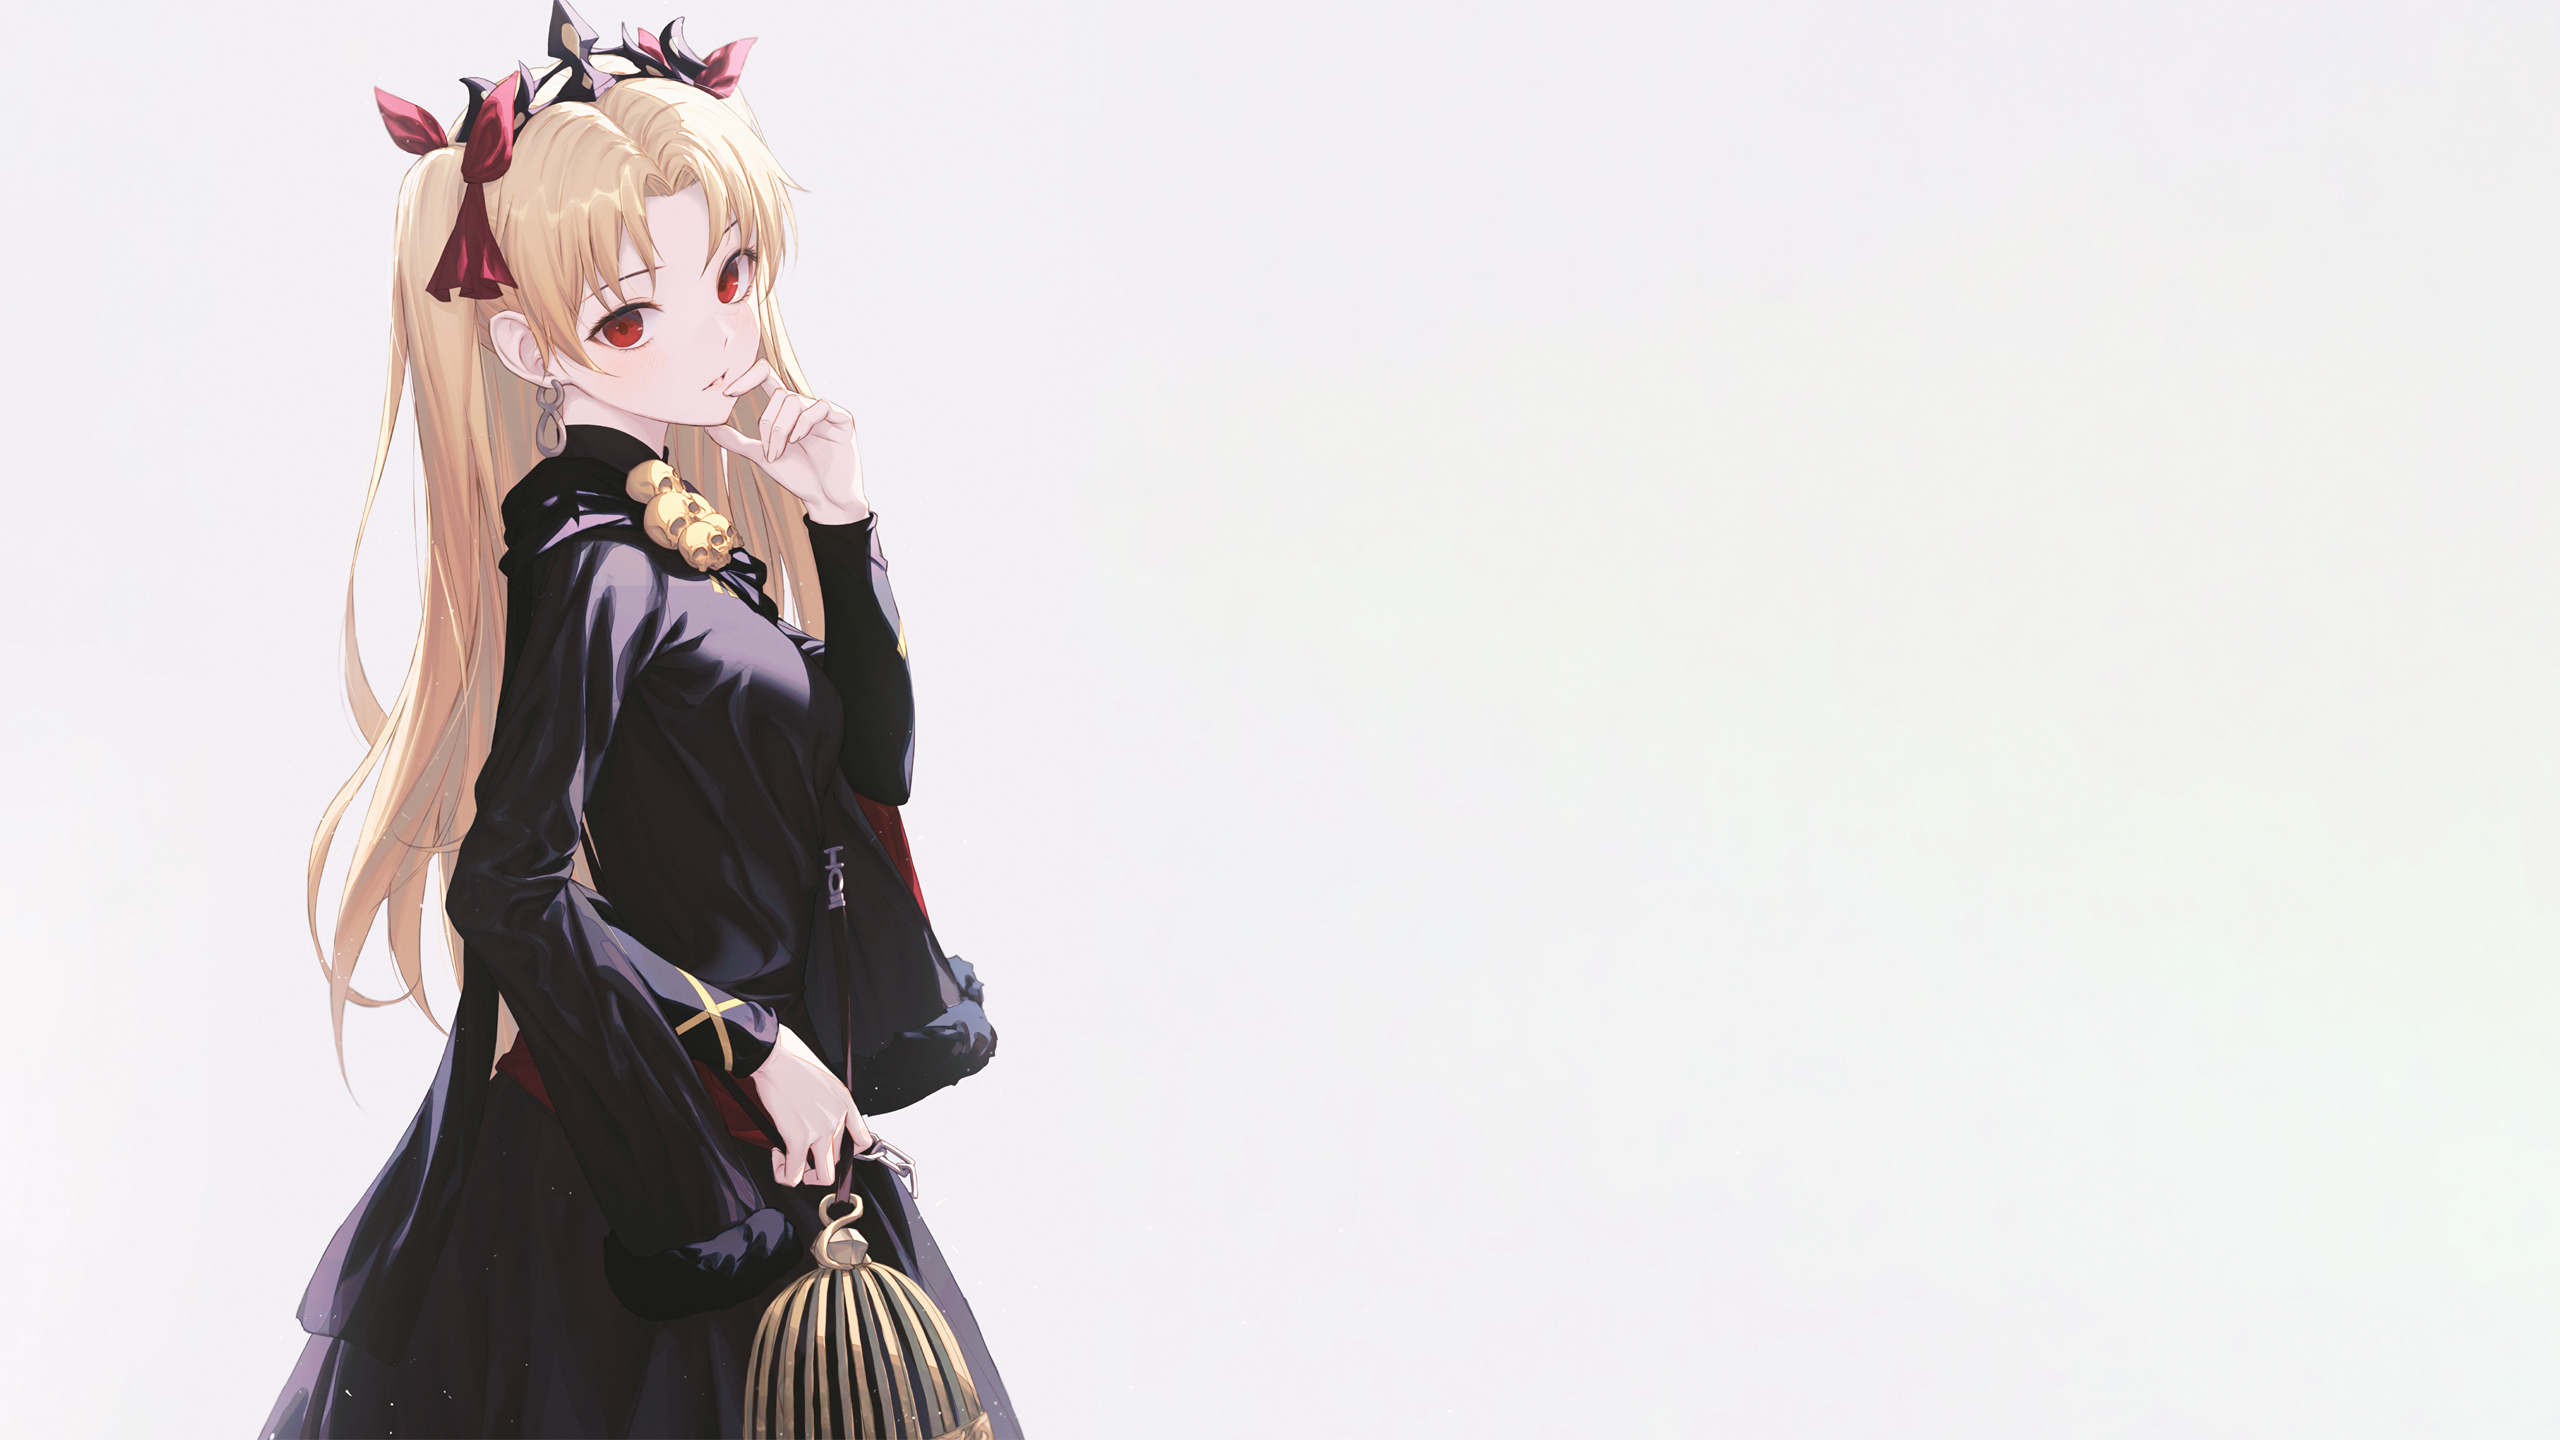 Anime 2560x1440 anime anime girls simple background Fate series Fate/Grand Order Ereshkigal (Fate/Grand Order) twintails blonde Hiera